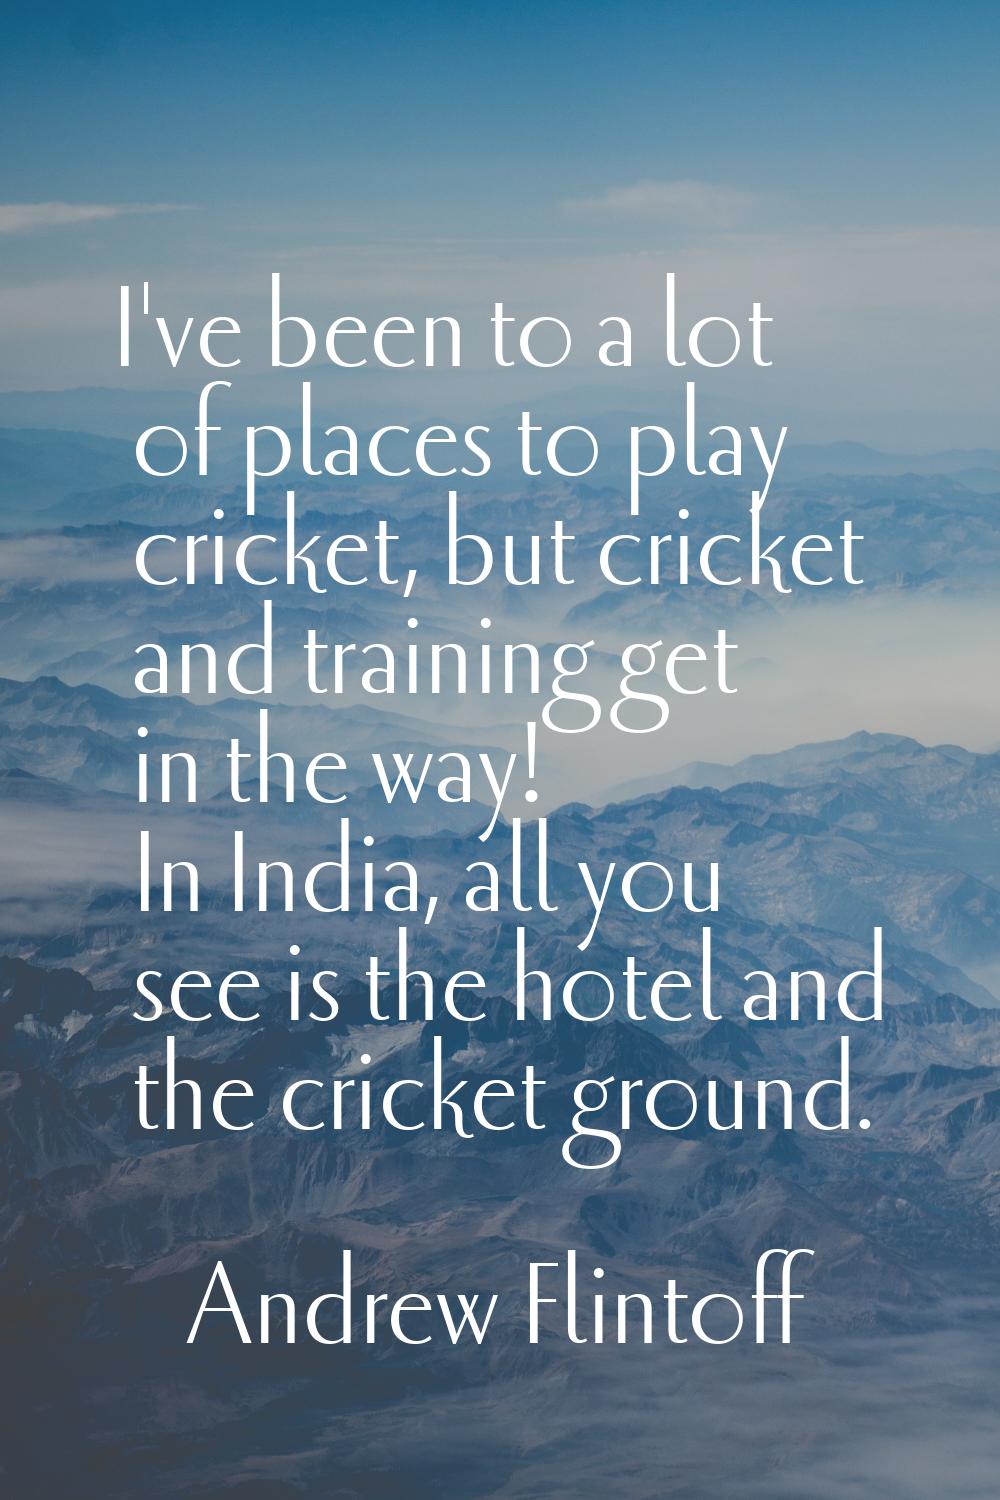 I've been to a lot of places to play cricket, but cricket and training get in the way! In India, al